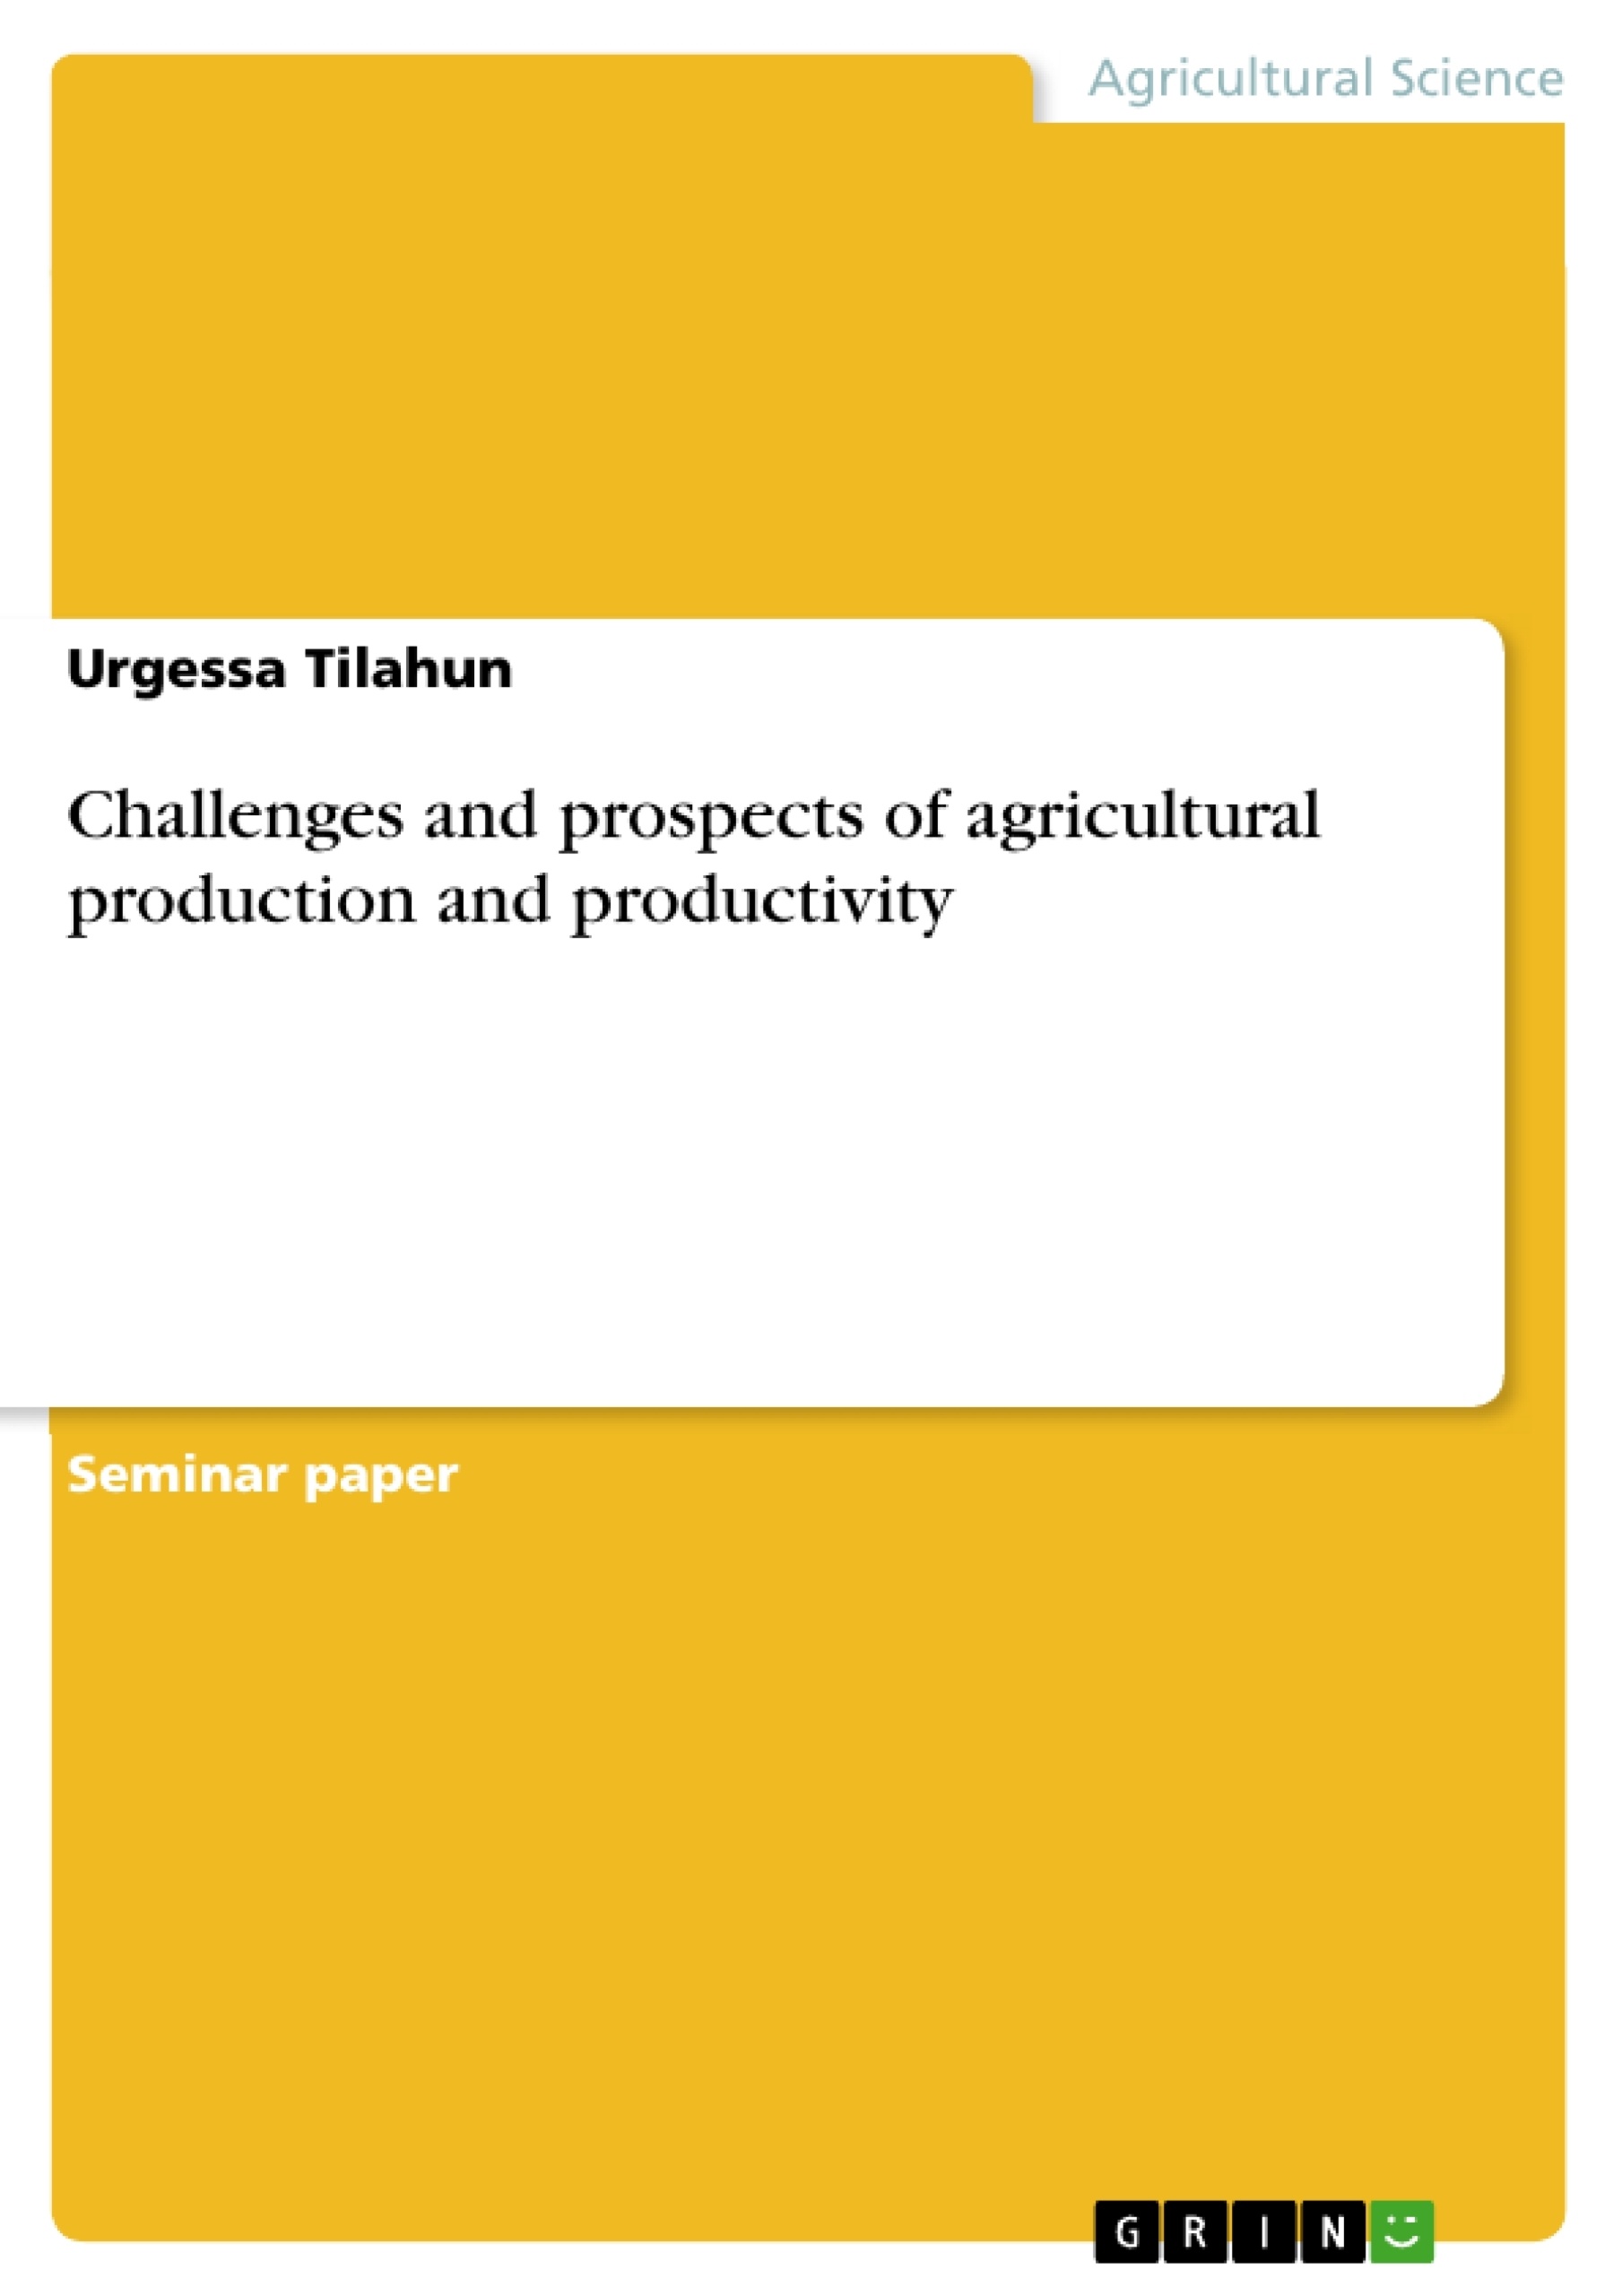 Title: Challenges and prospects of agricultural production and productivity